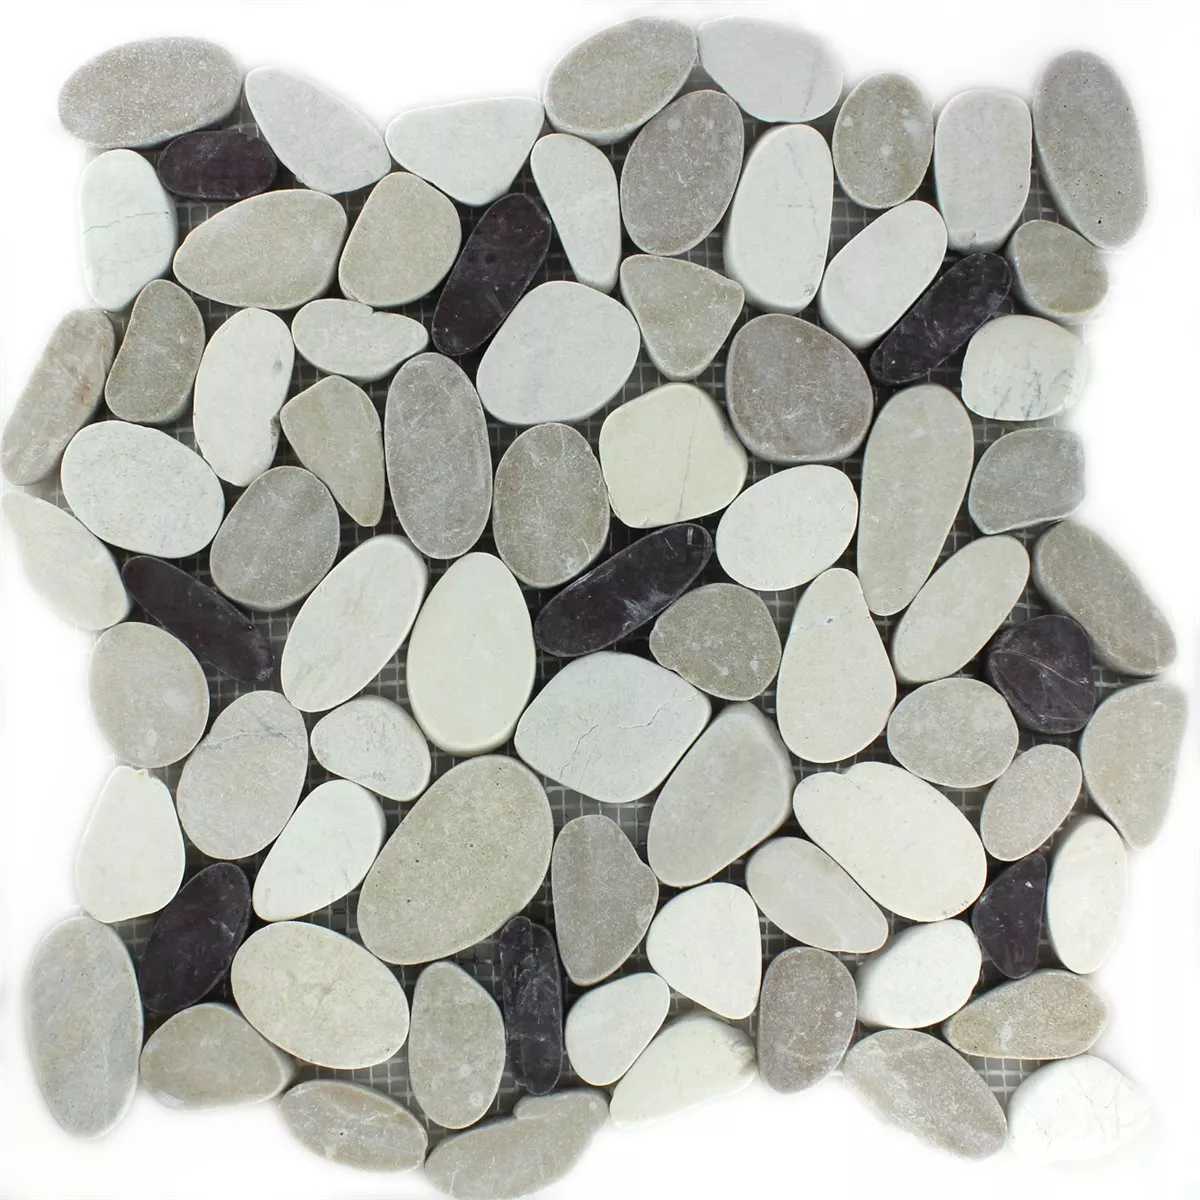 Sample Mosaic Tiles River Pebbles Serrated White Beige Pink